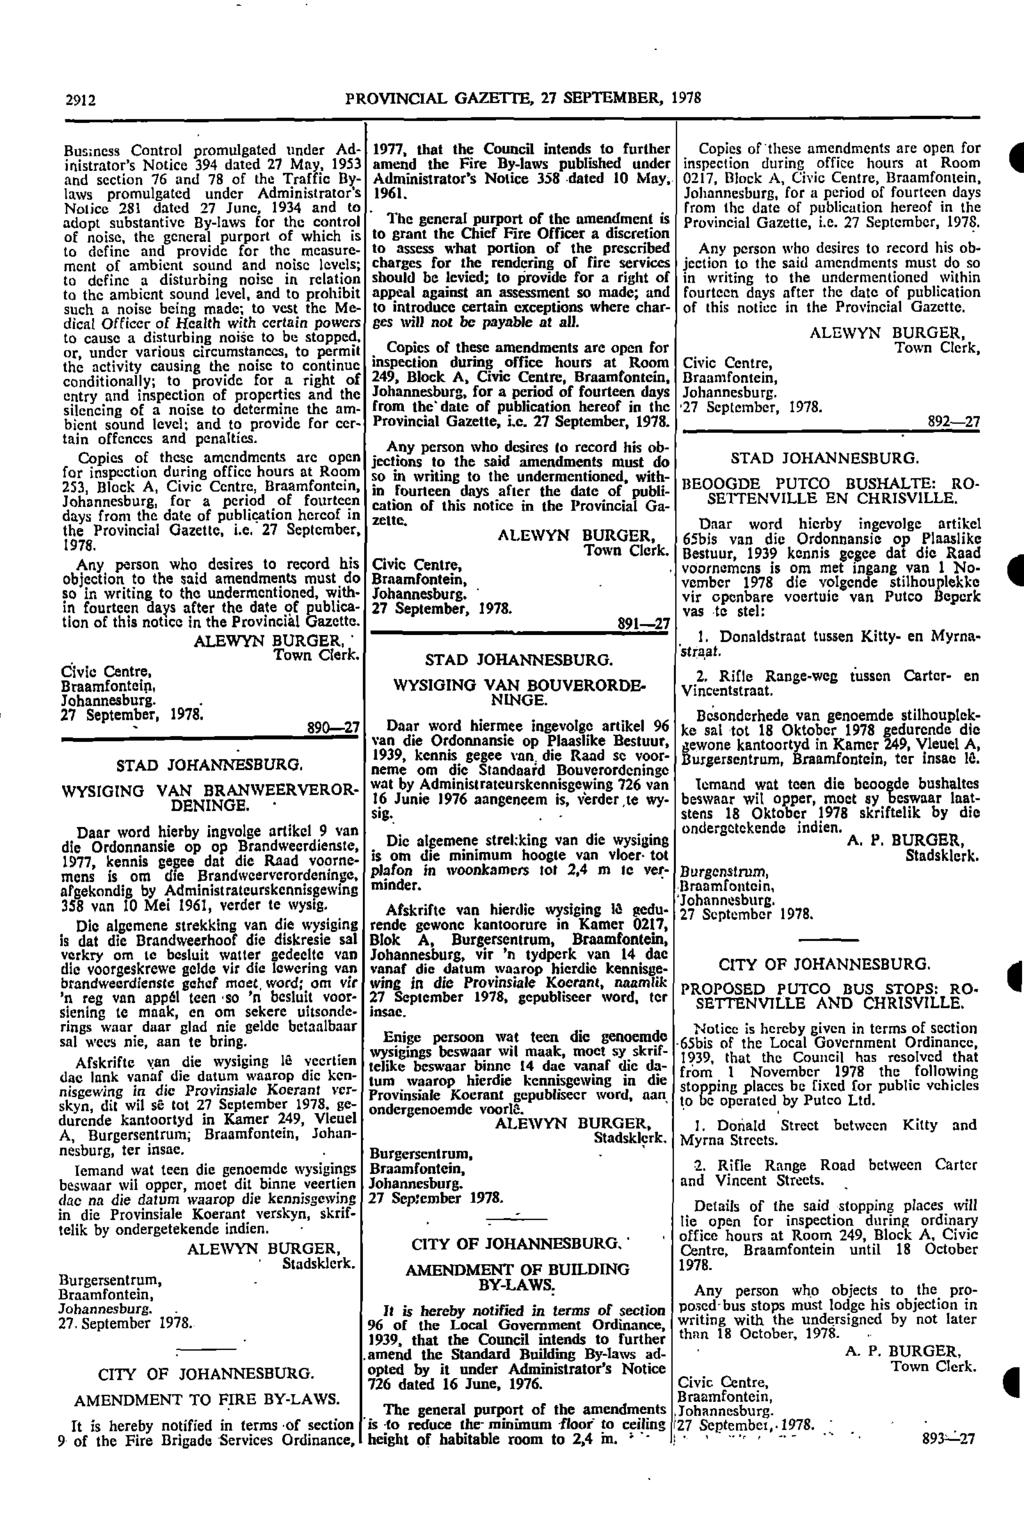 2912 PROVINCIAL GAZETTE 27 SEPTEMBER 1978 Business Control promulgated under Ad 1977 that the Council intends to further Copies of these amendments are open for inistrators Notice 39 dated 27 May